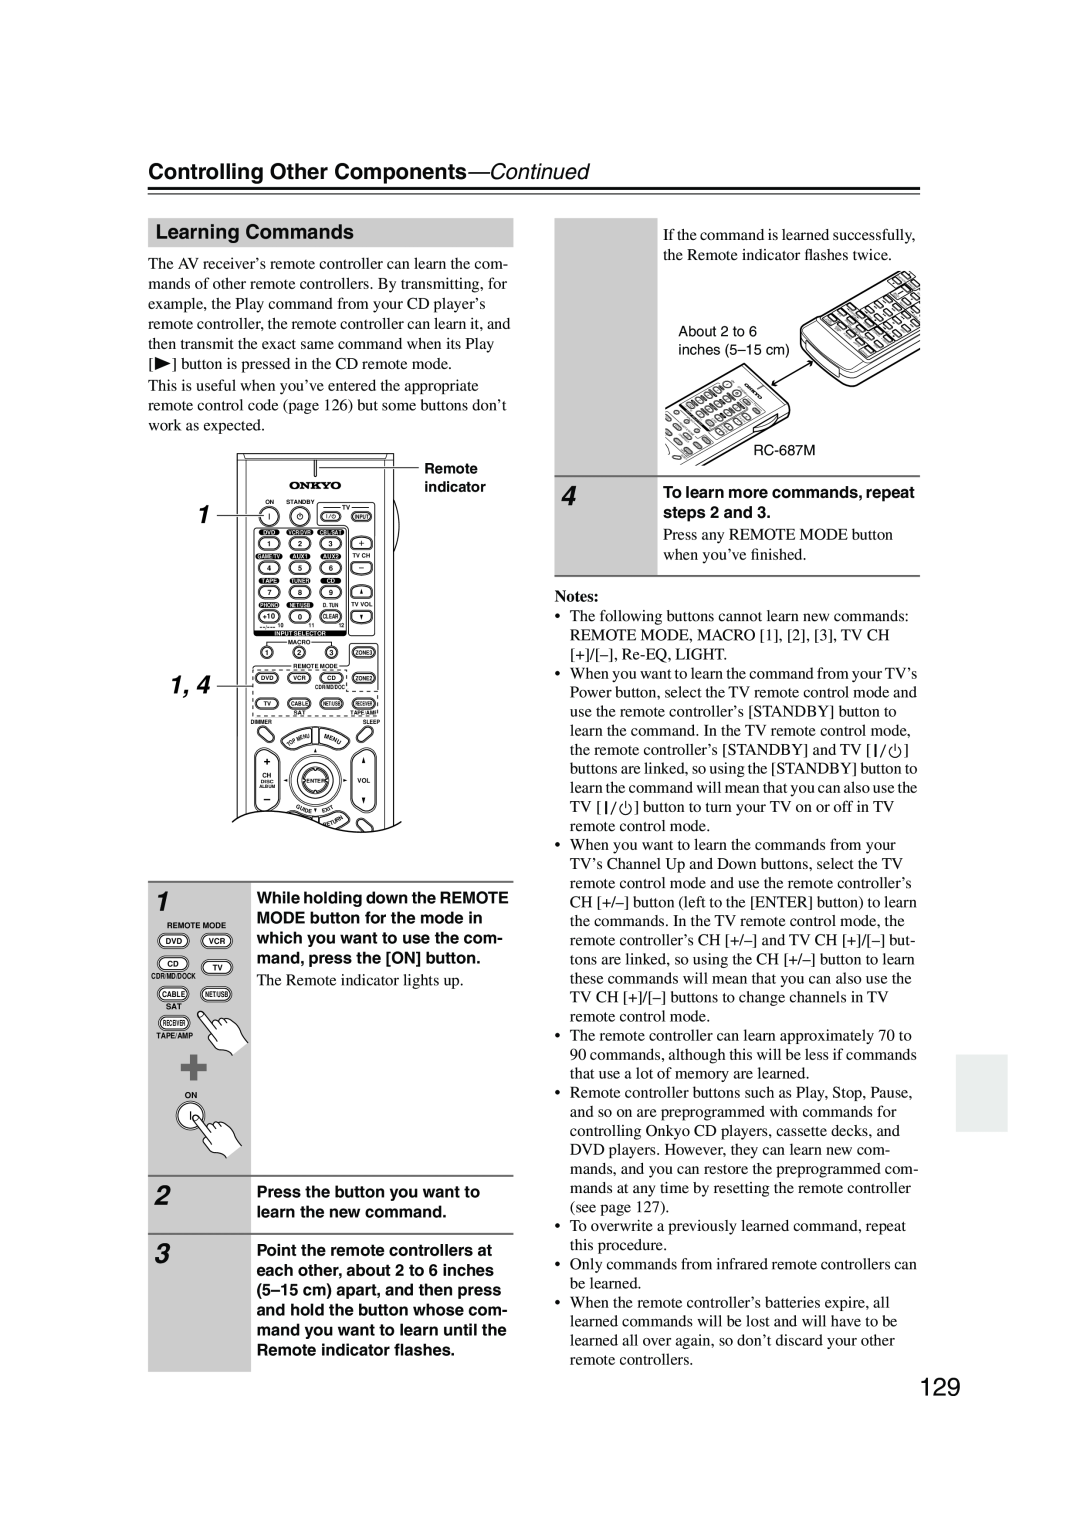 Onkyo TX-NR905 instruction manual Learning Commands, Controlling Other Components—Continued, Notes 